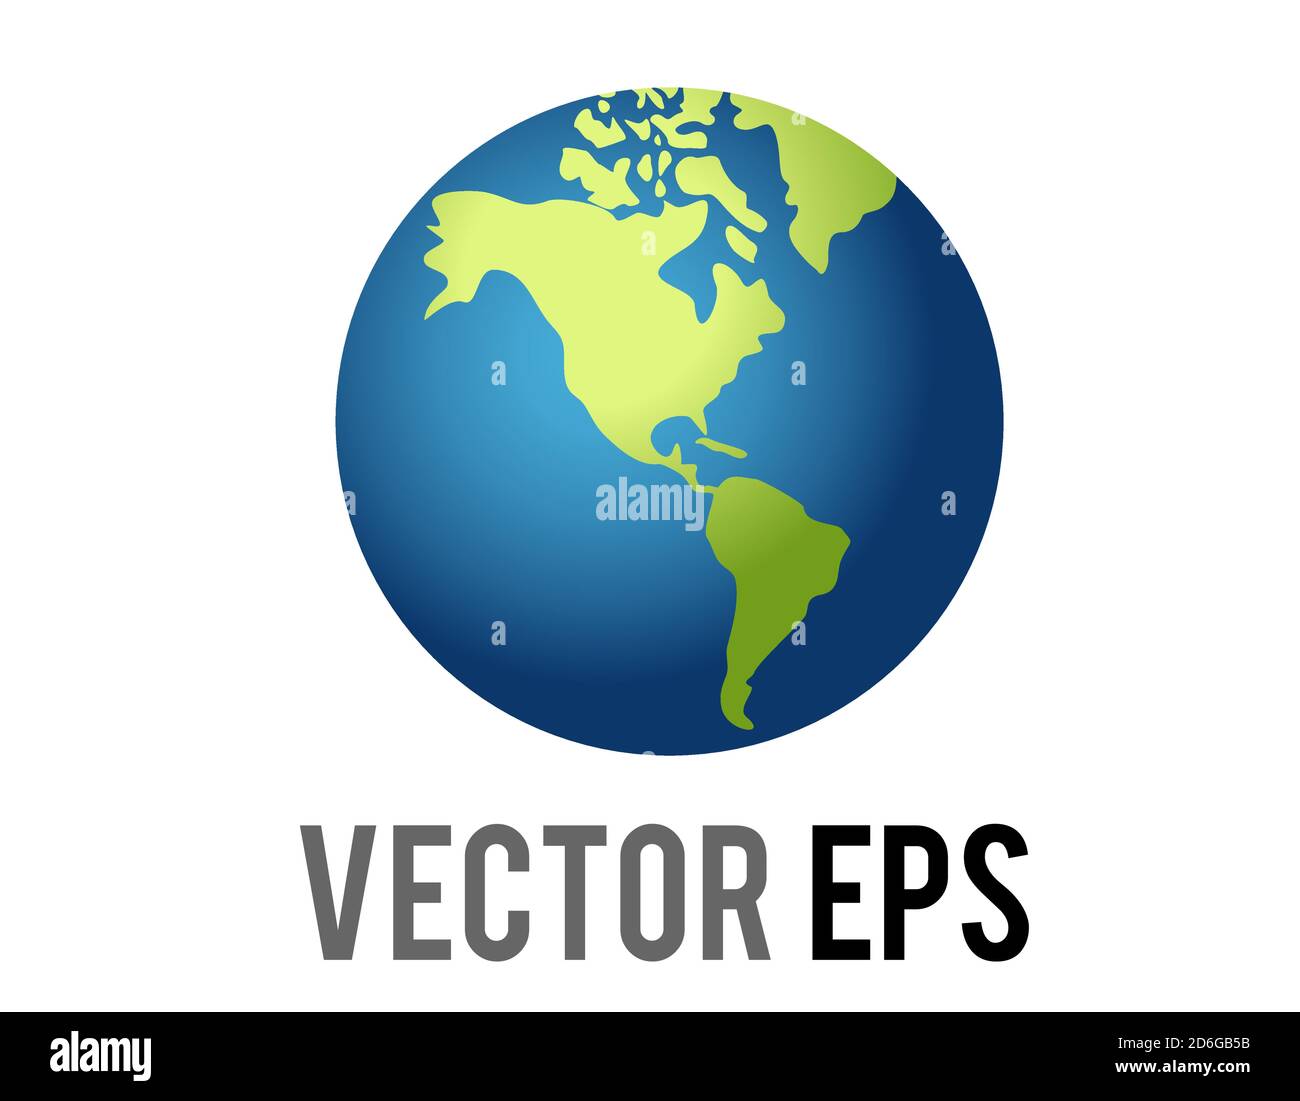 The isolated vector globe showing Americas icon, showing North, South America in green against blue ocean, represent various content concerning the No Stock Vector